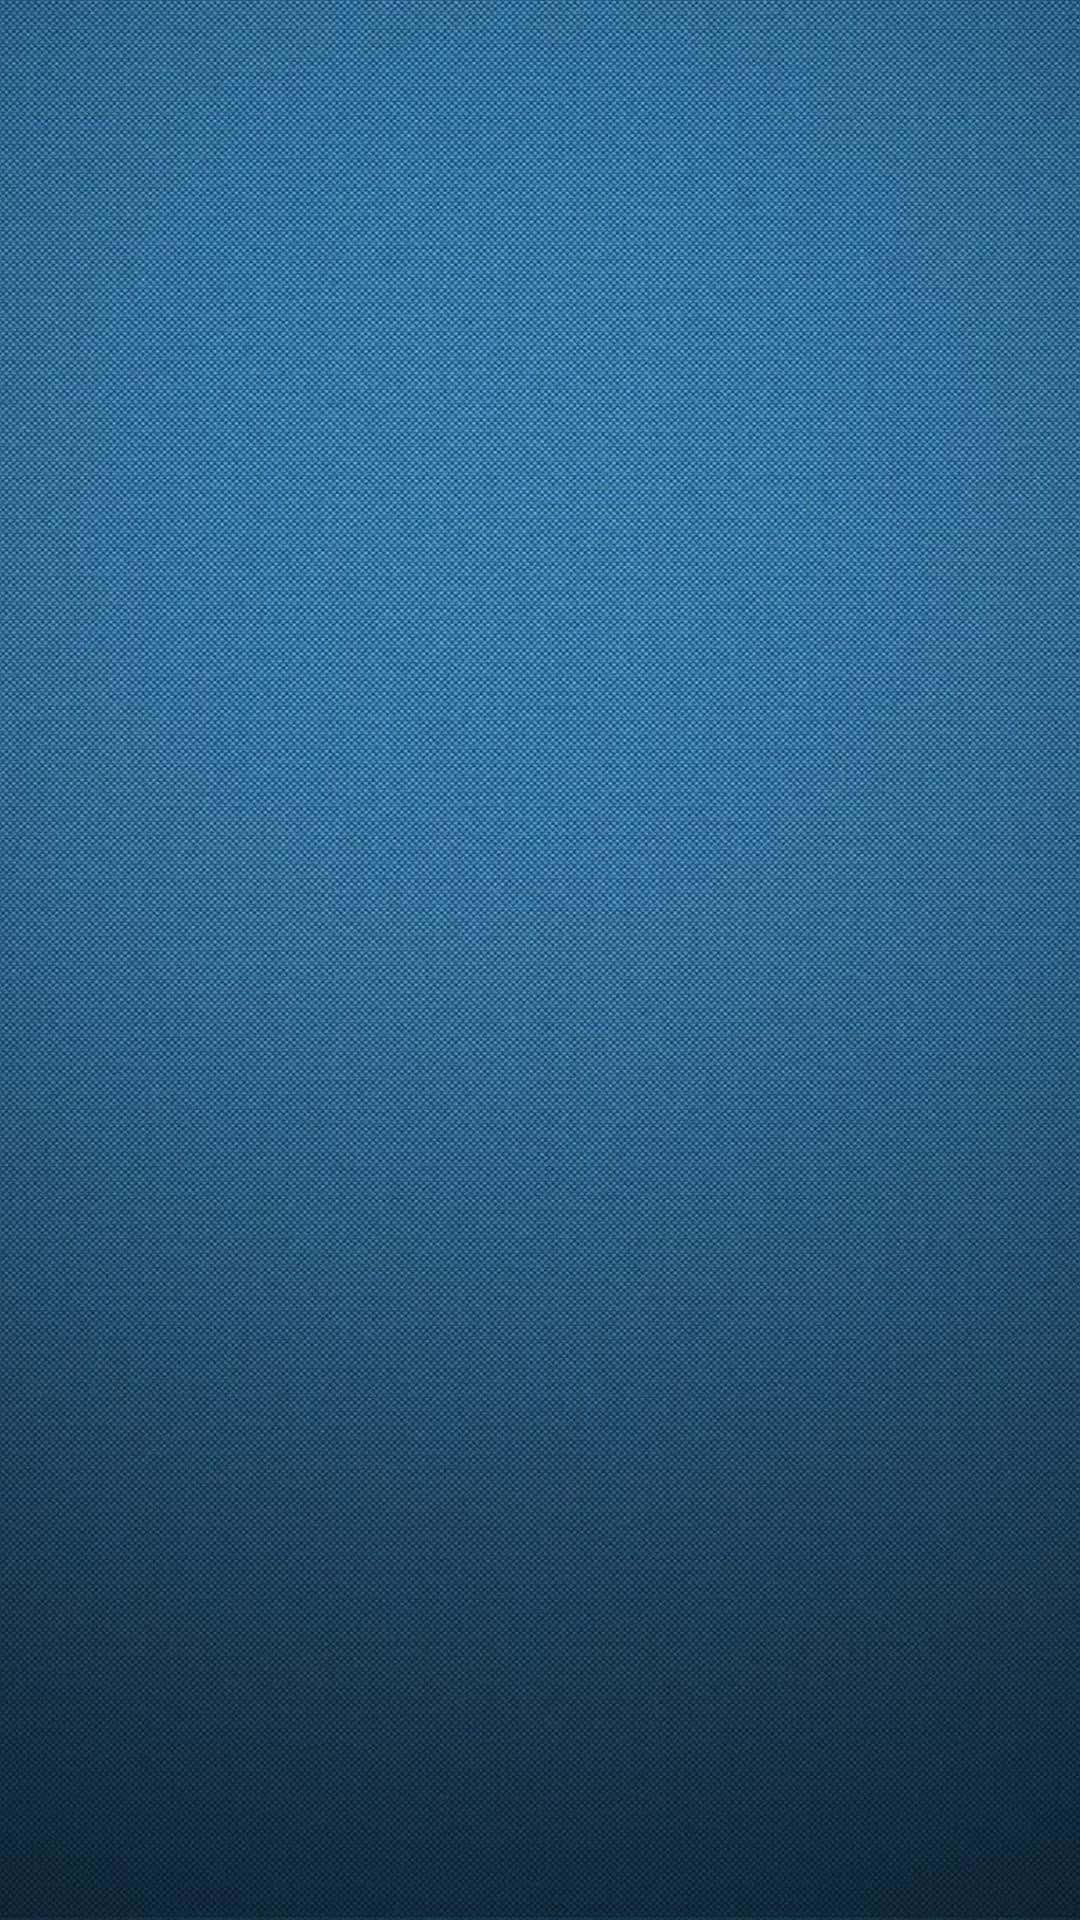 Solid Blue Iphone Wallpapers